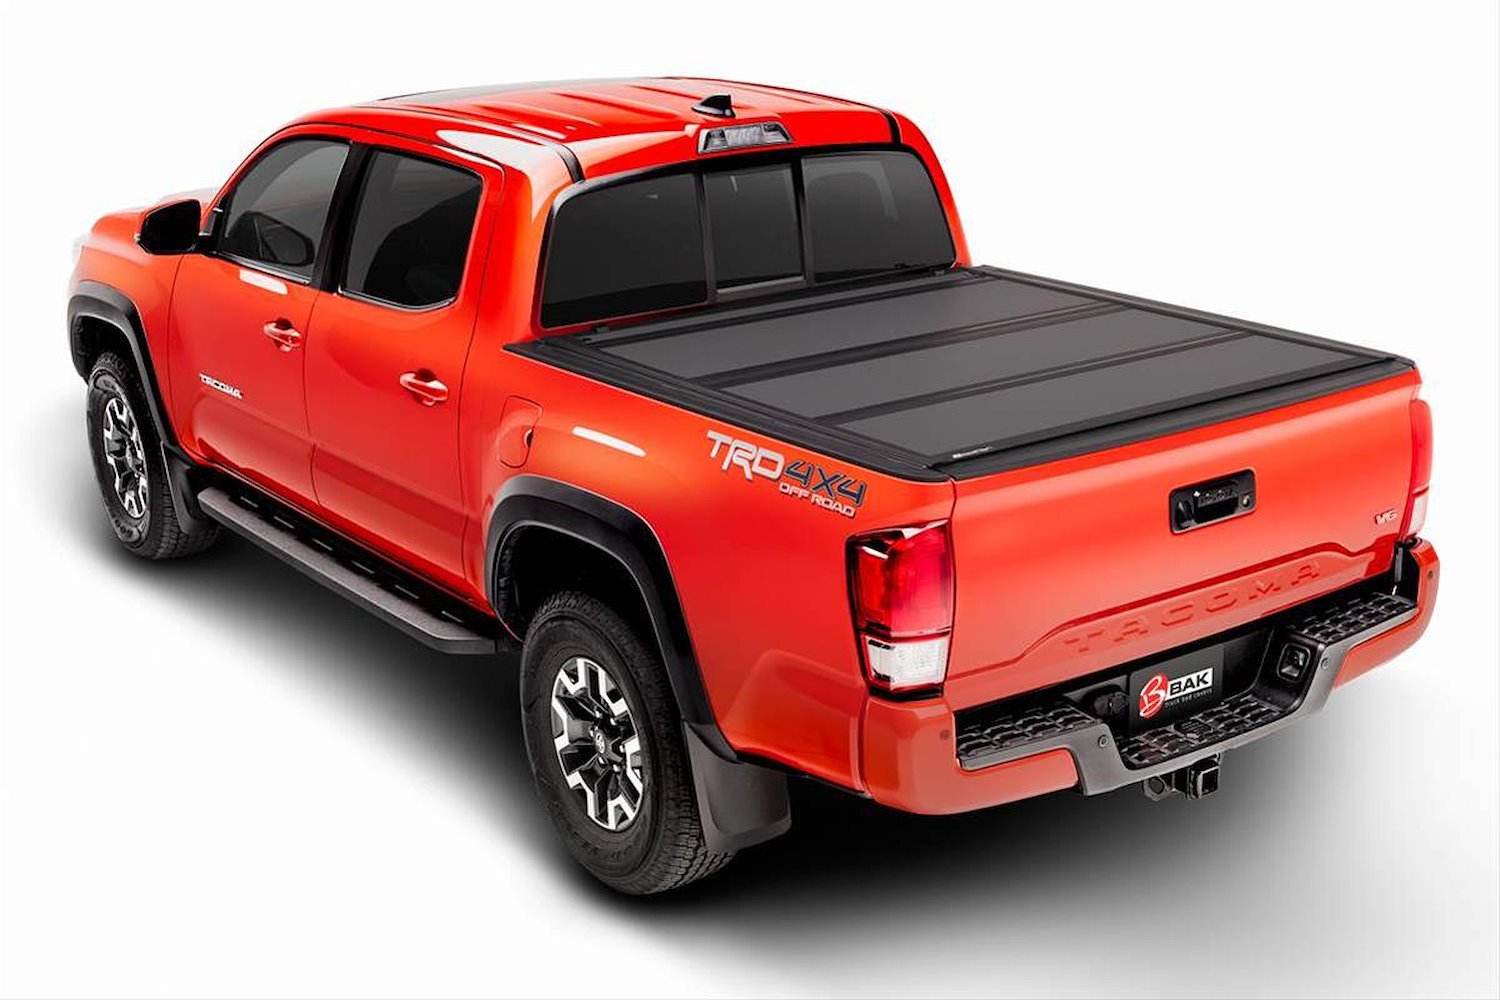 448426 BAKFlip MX4 for Fits Select Toyota Tacoma 5.1 ft. Bed, Hard Folding Cover Style [Black Finish]